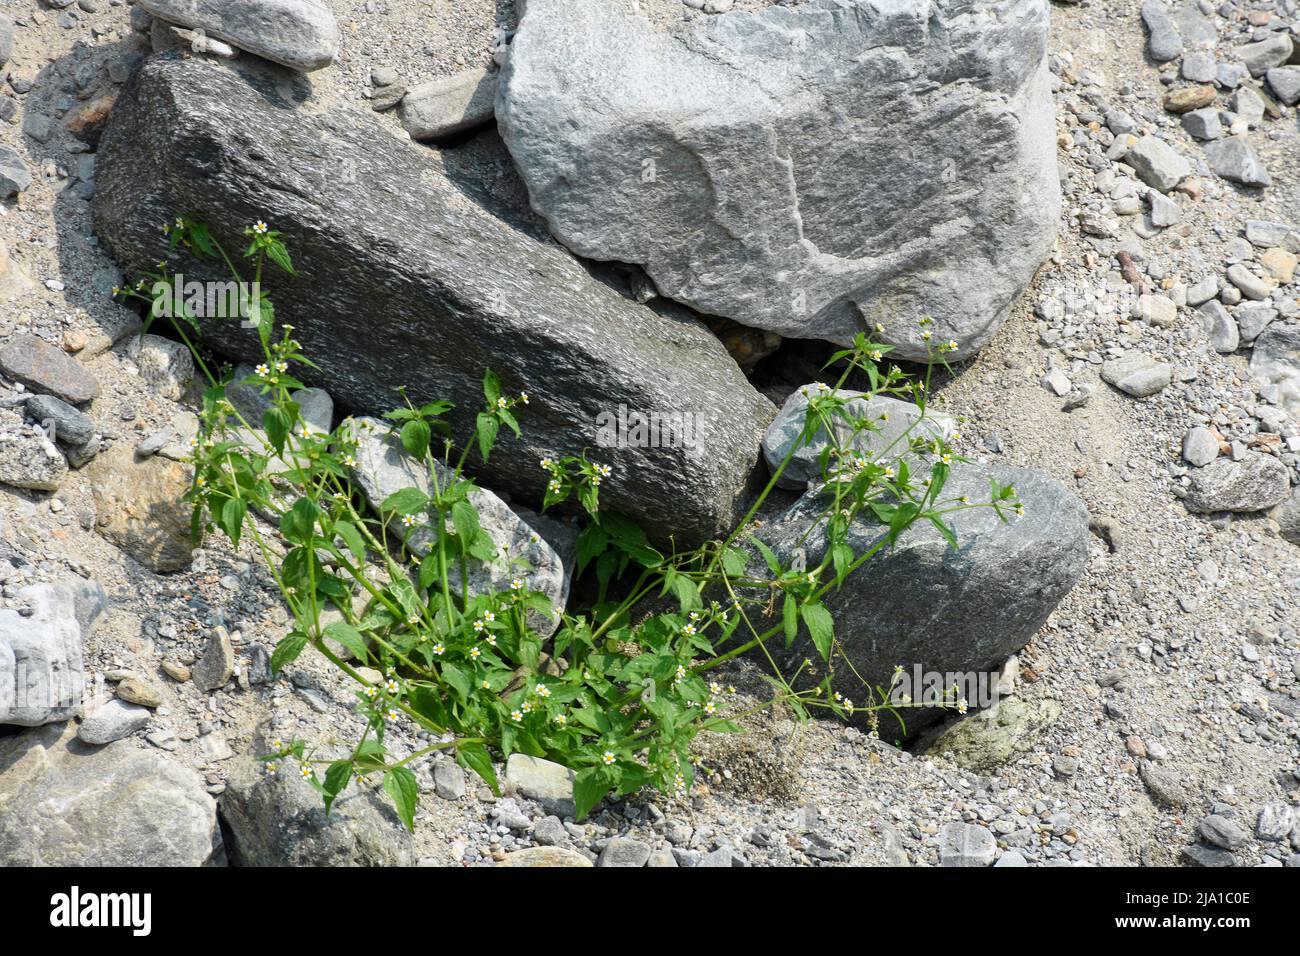 Green River Sage Plant and Himalayan rivulets with boulders Stock Photo